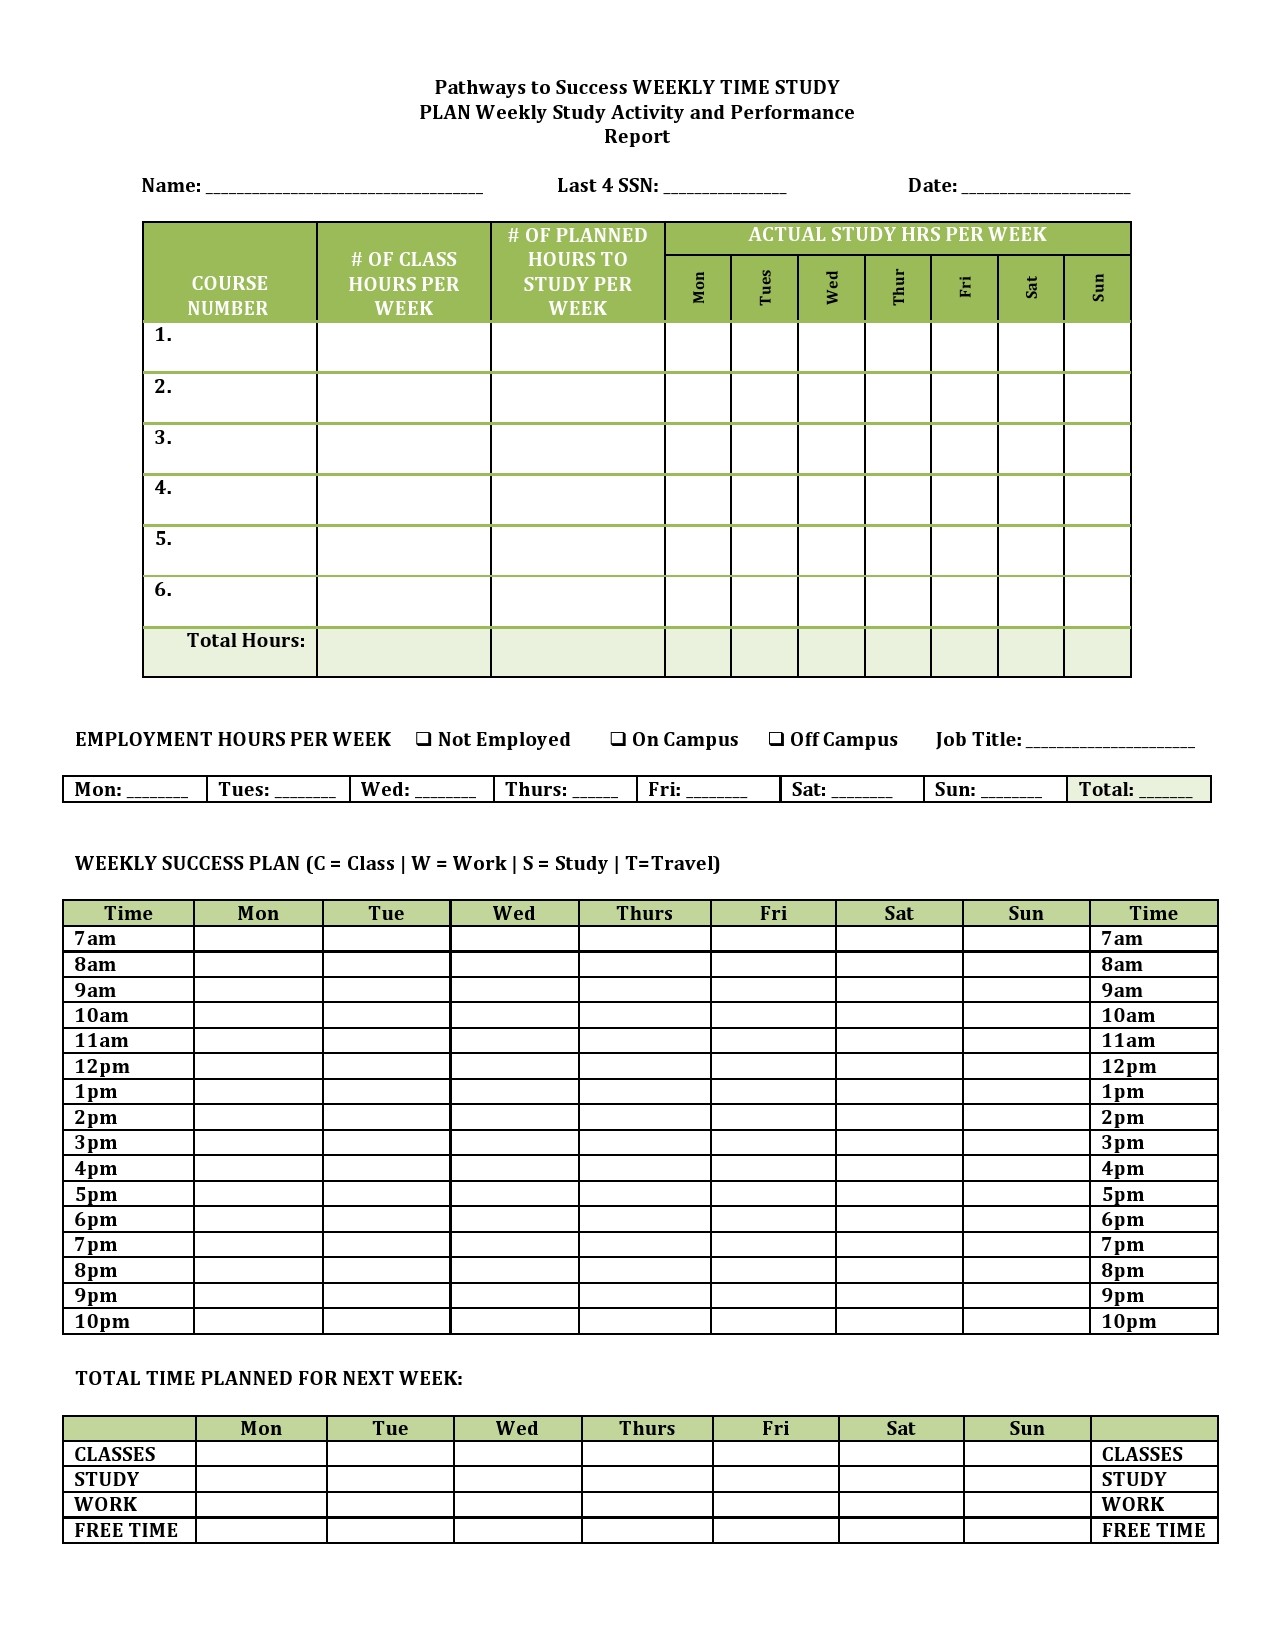 Process time study template excel free download 8789 words of wisdom pdf download